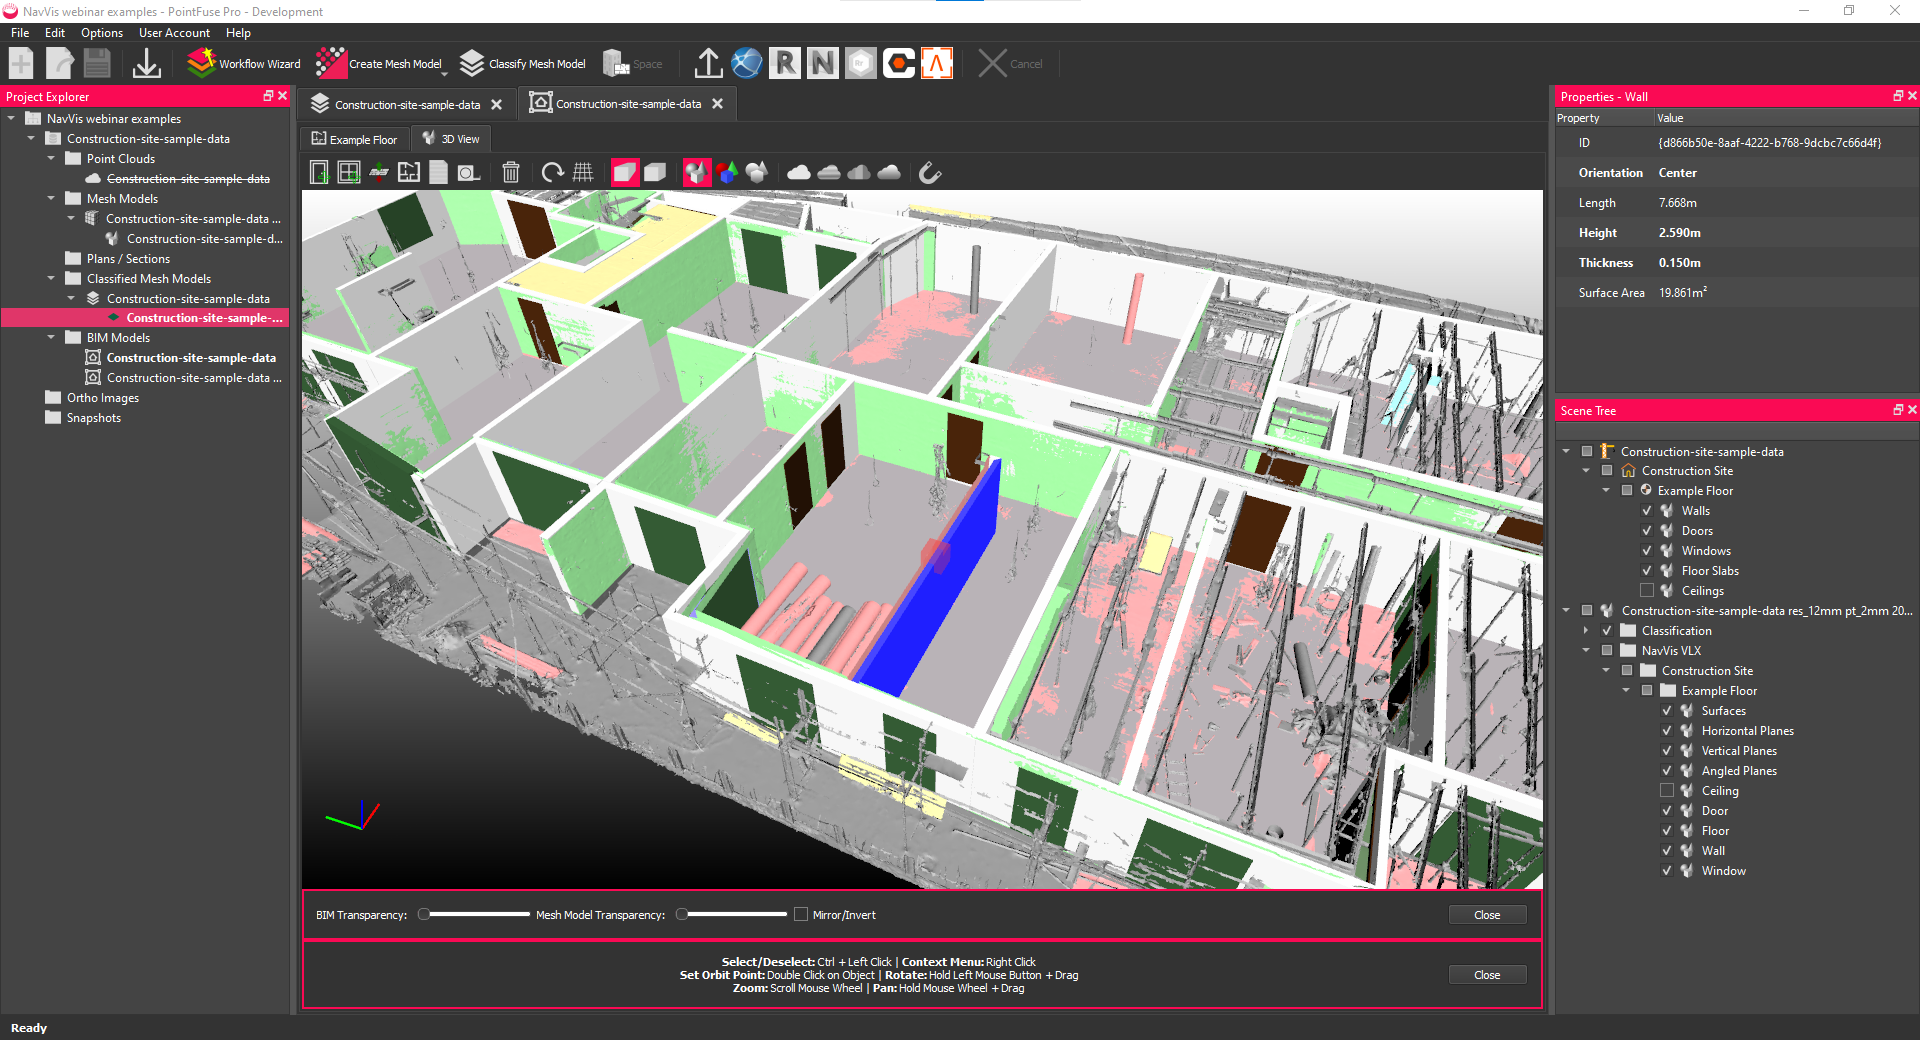 3_PF Mesh and LOD200 BIM model created from NavVis VLX data